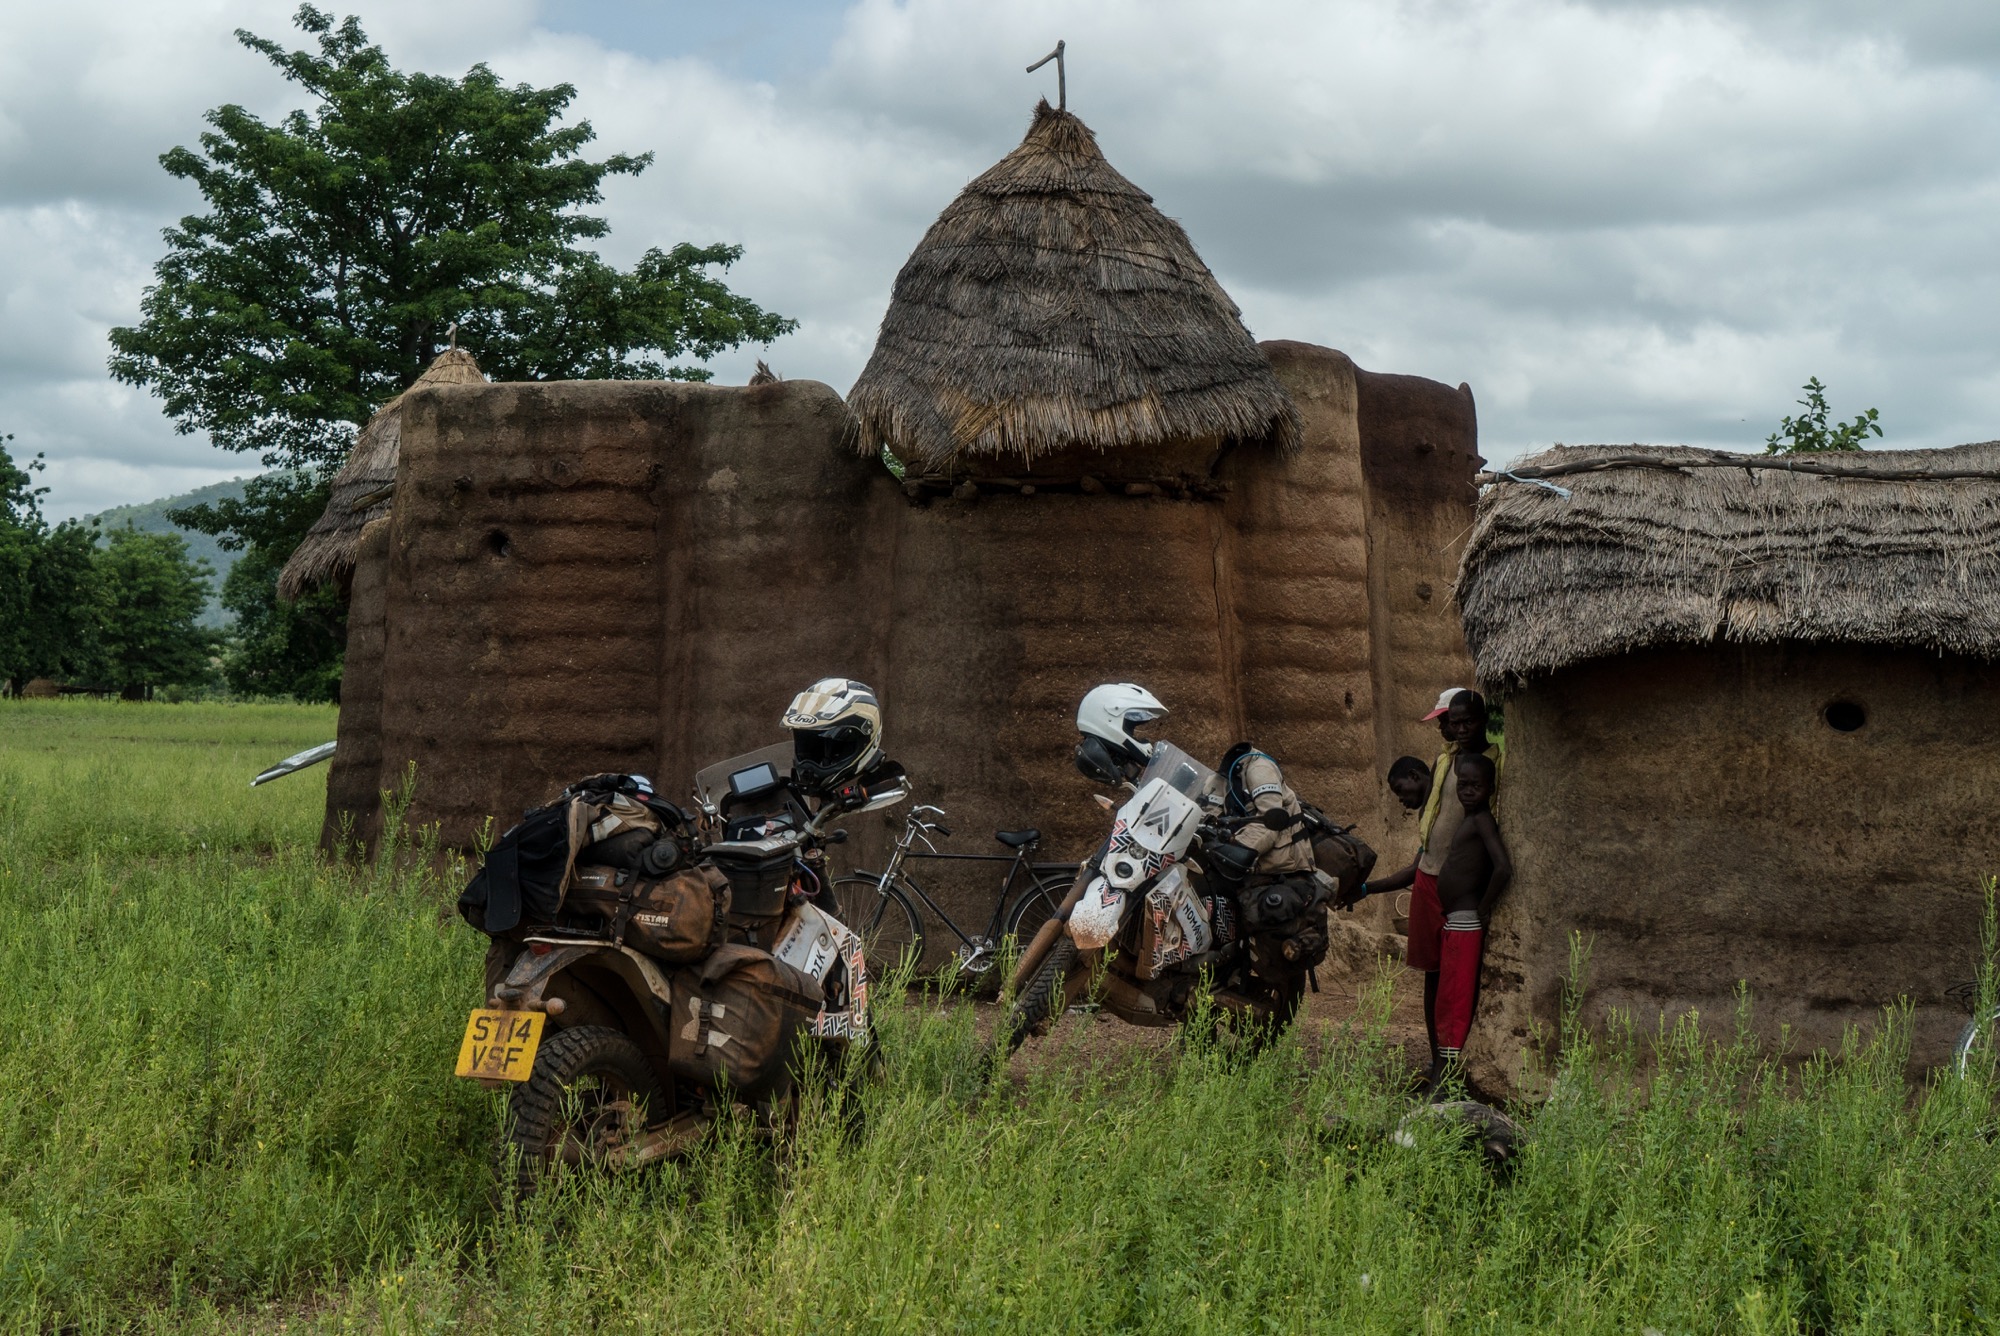   The UNESCO World Heritage site of Koutammakou in Togo. The mud brick huts are notable for being built numerous stories high with living quarters, grain storage and even acting as a fort.  